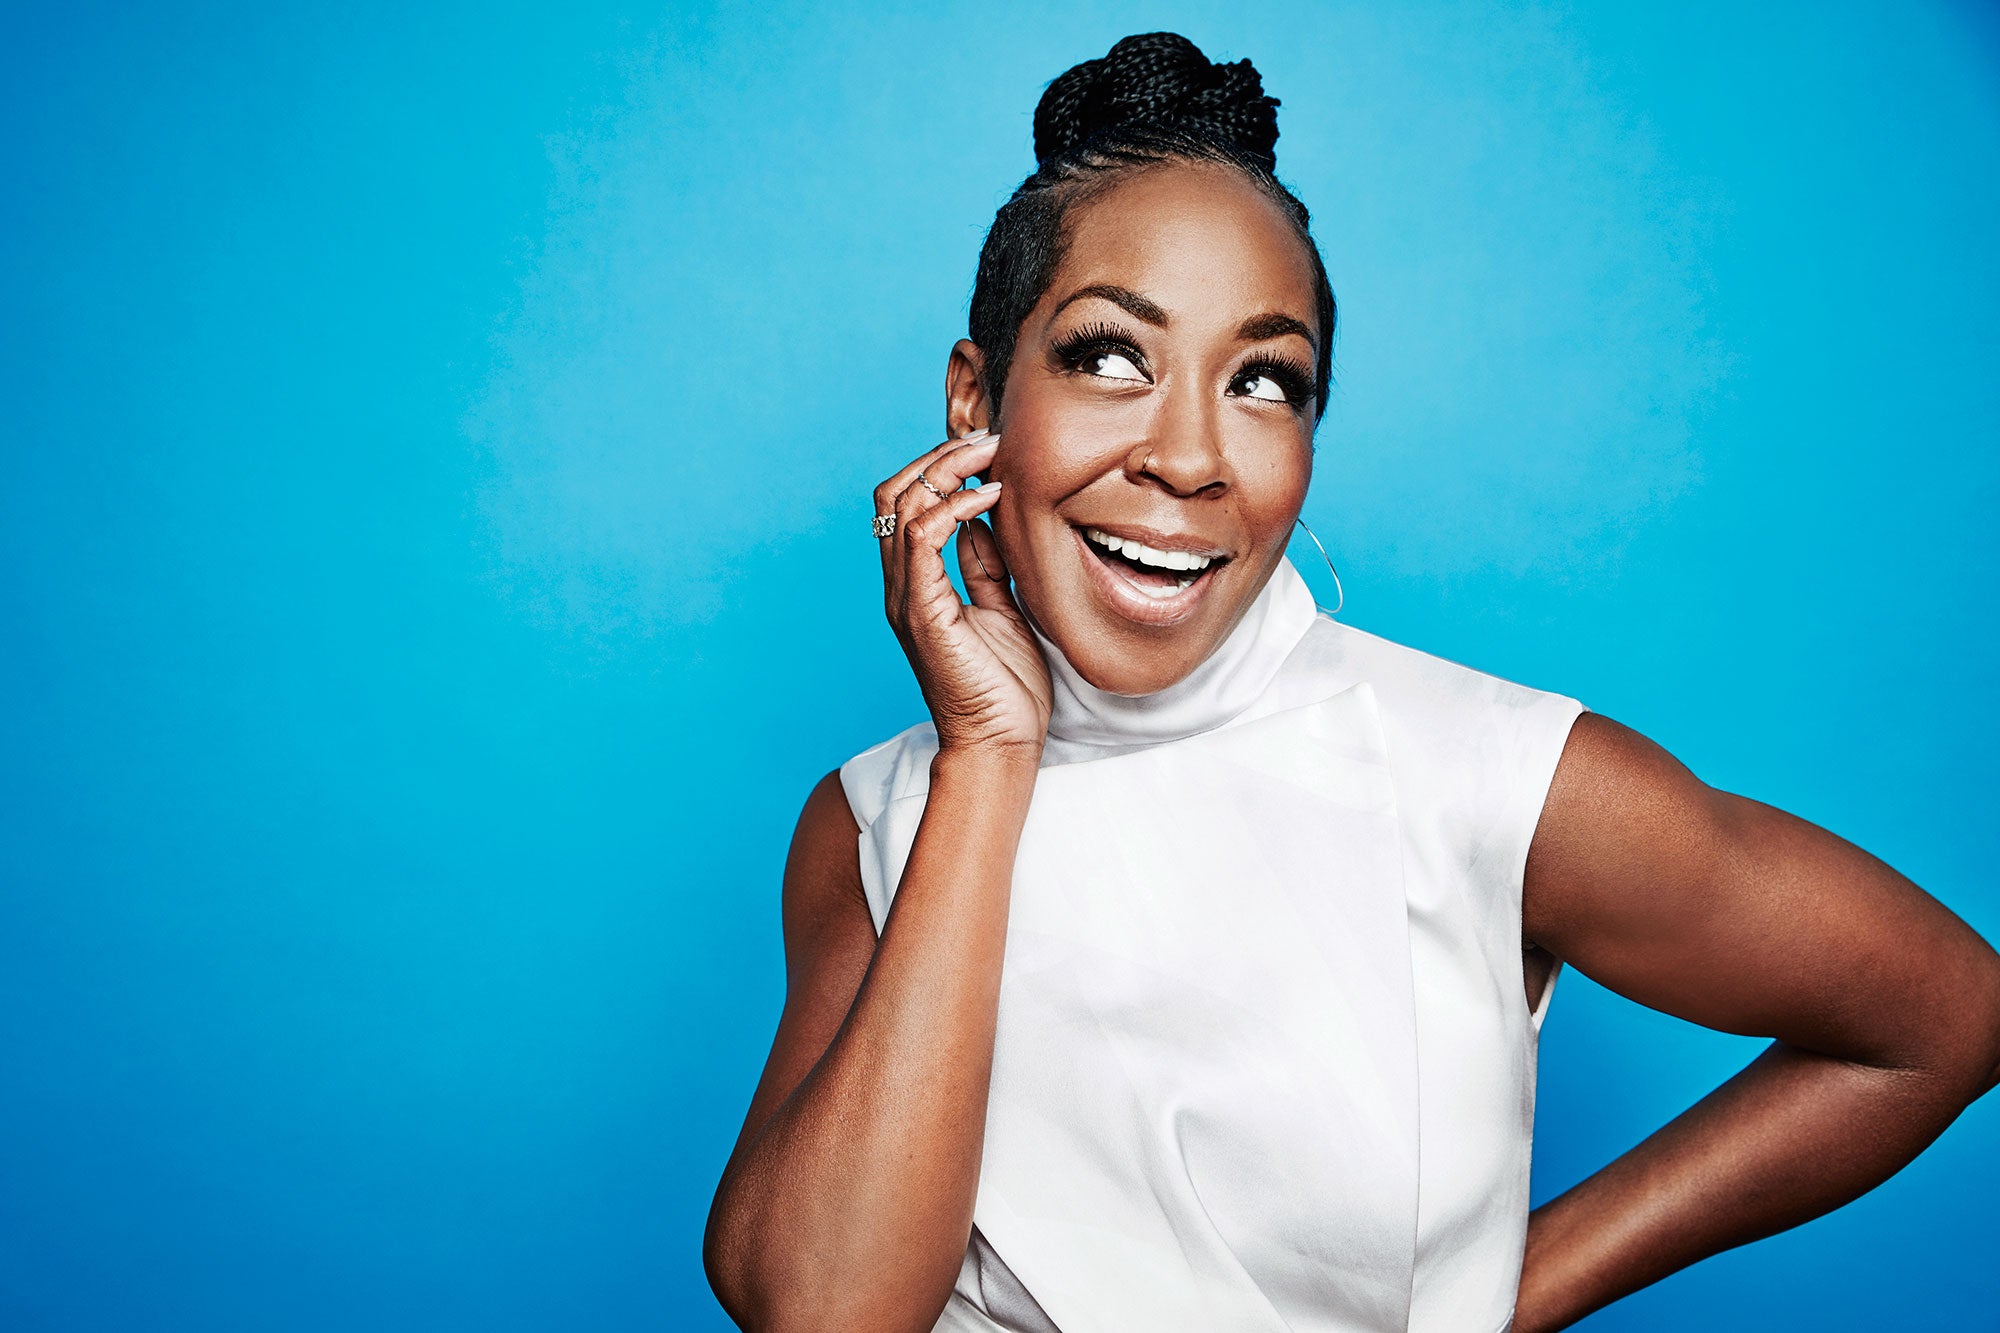 McDonald's 365 Black Awards Honoree Tichina Arnold Shares Deeply Personal Reason Behind Quest To Fight Lupus
